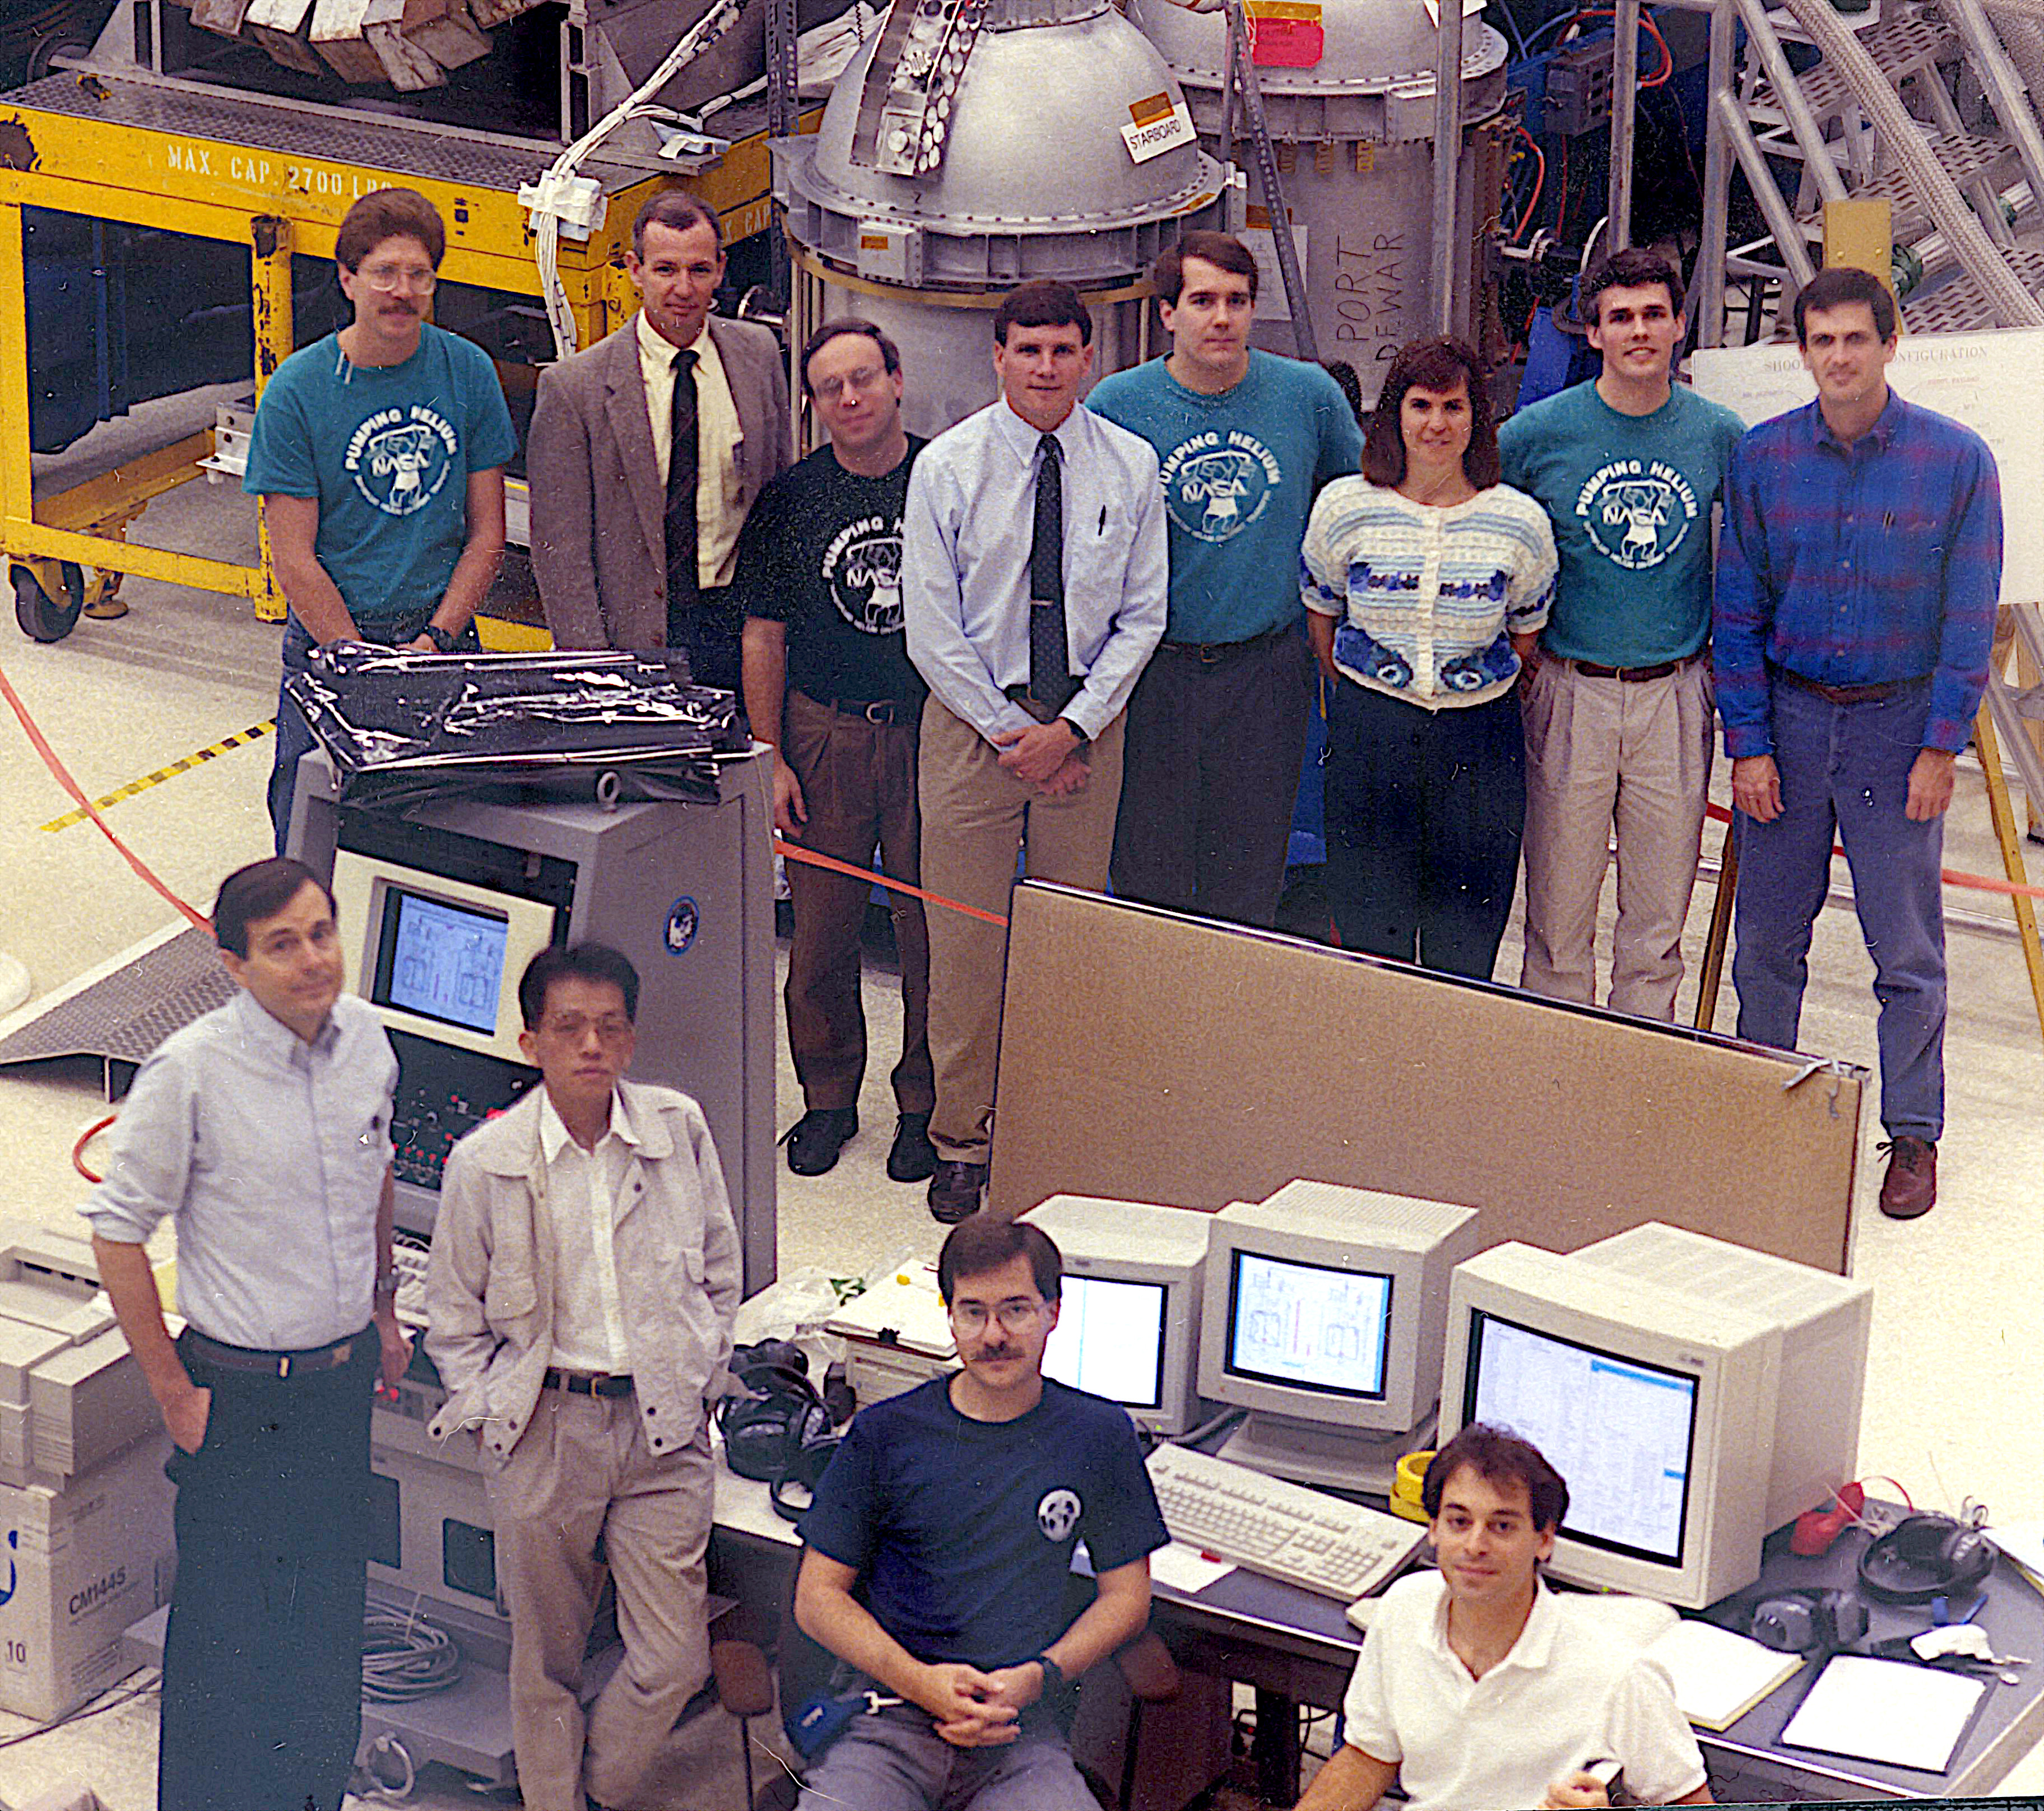 Image: In this image are people well-known to the cryogenics community: Mike DiPirro, Peter Shirron, and Jim Tuttle. If you know them, you should be able to pick them out. (Hint: look at the second row.) Also included are the astronaut mission specialists Janice E. Voss and Peter J. Wisoff, who were tasked with taking care of SHOOT while on orbit. They are third and first from the right in the second row. The two dewars are seen in the background. 